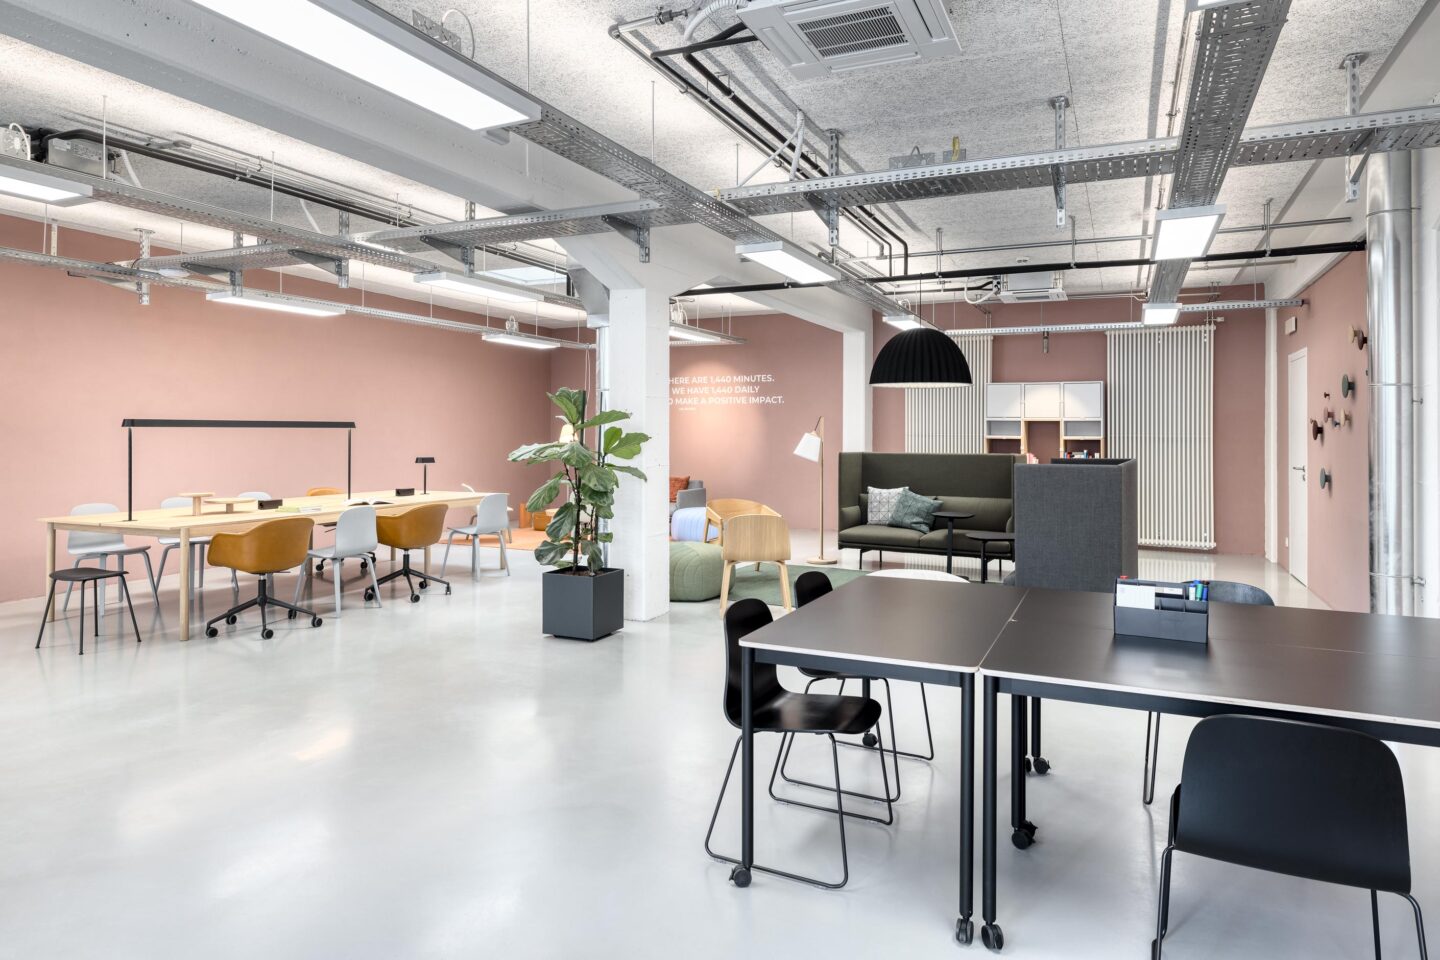 The Impact Studio is located in SteamWork Karlsruhe, a coworking space in Karlsruhe's Südweststadt, which is run by GoodSpaces